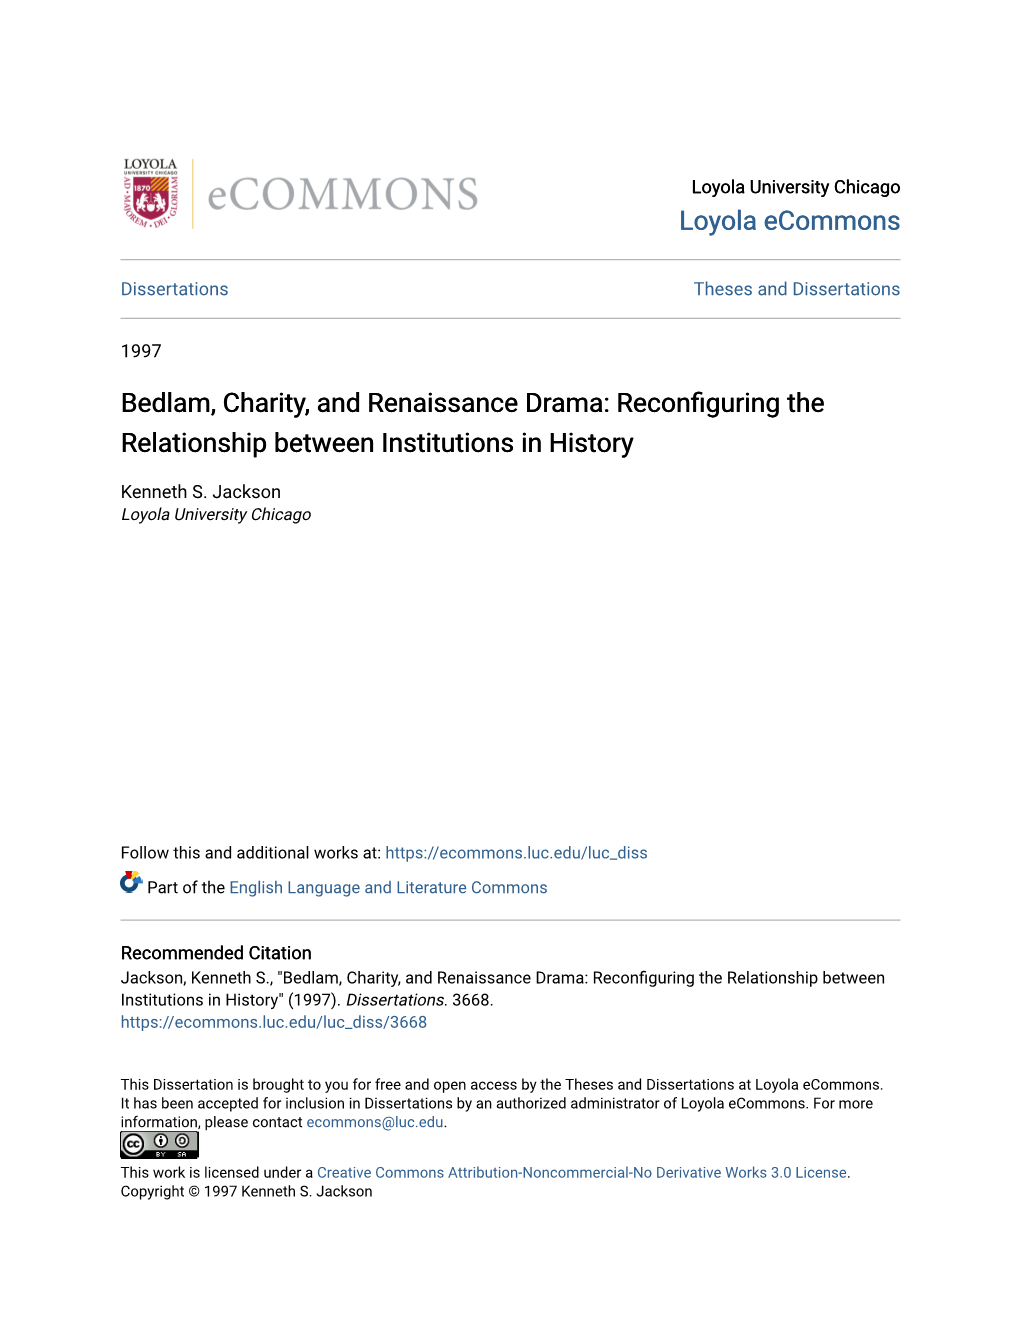 Bedlam, Charity, and Renaissance Drama: Reconfiguring the Relationship Between Institutions in History